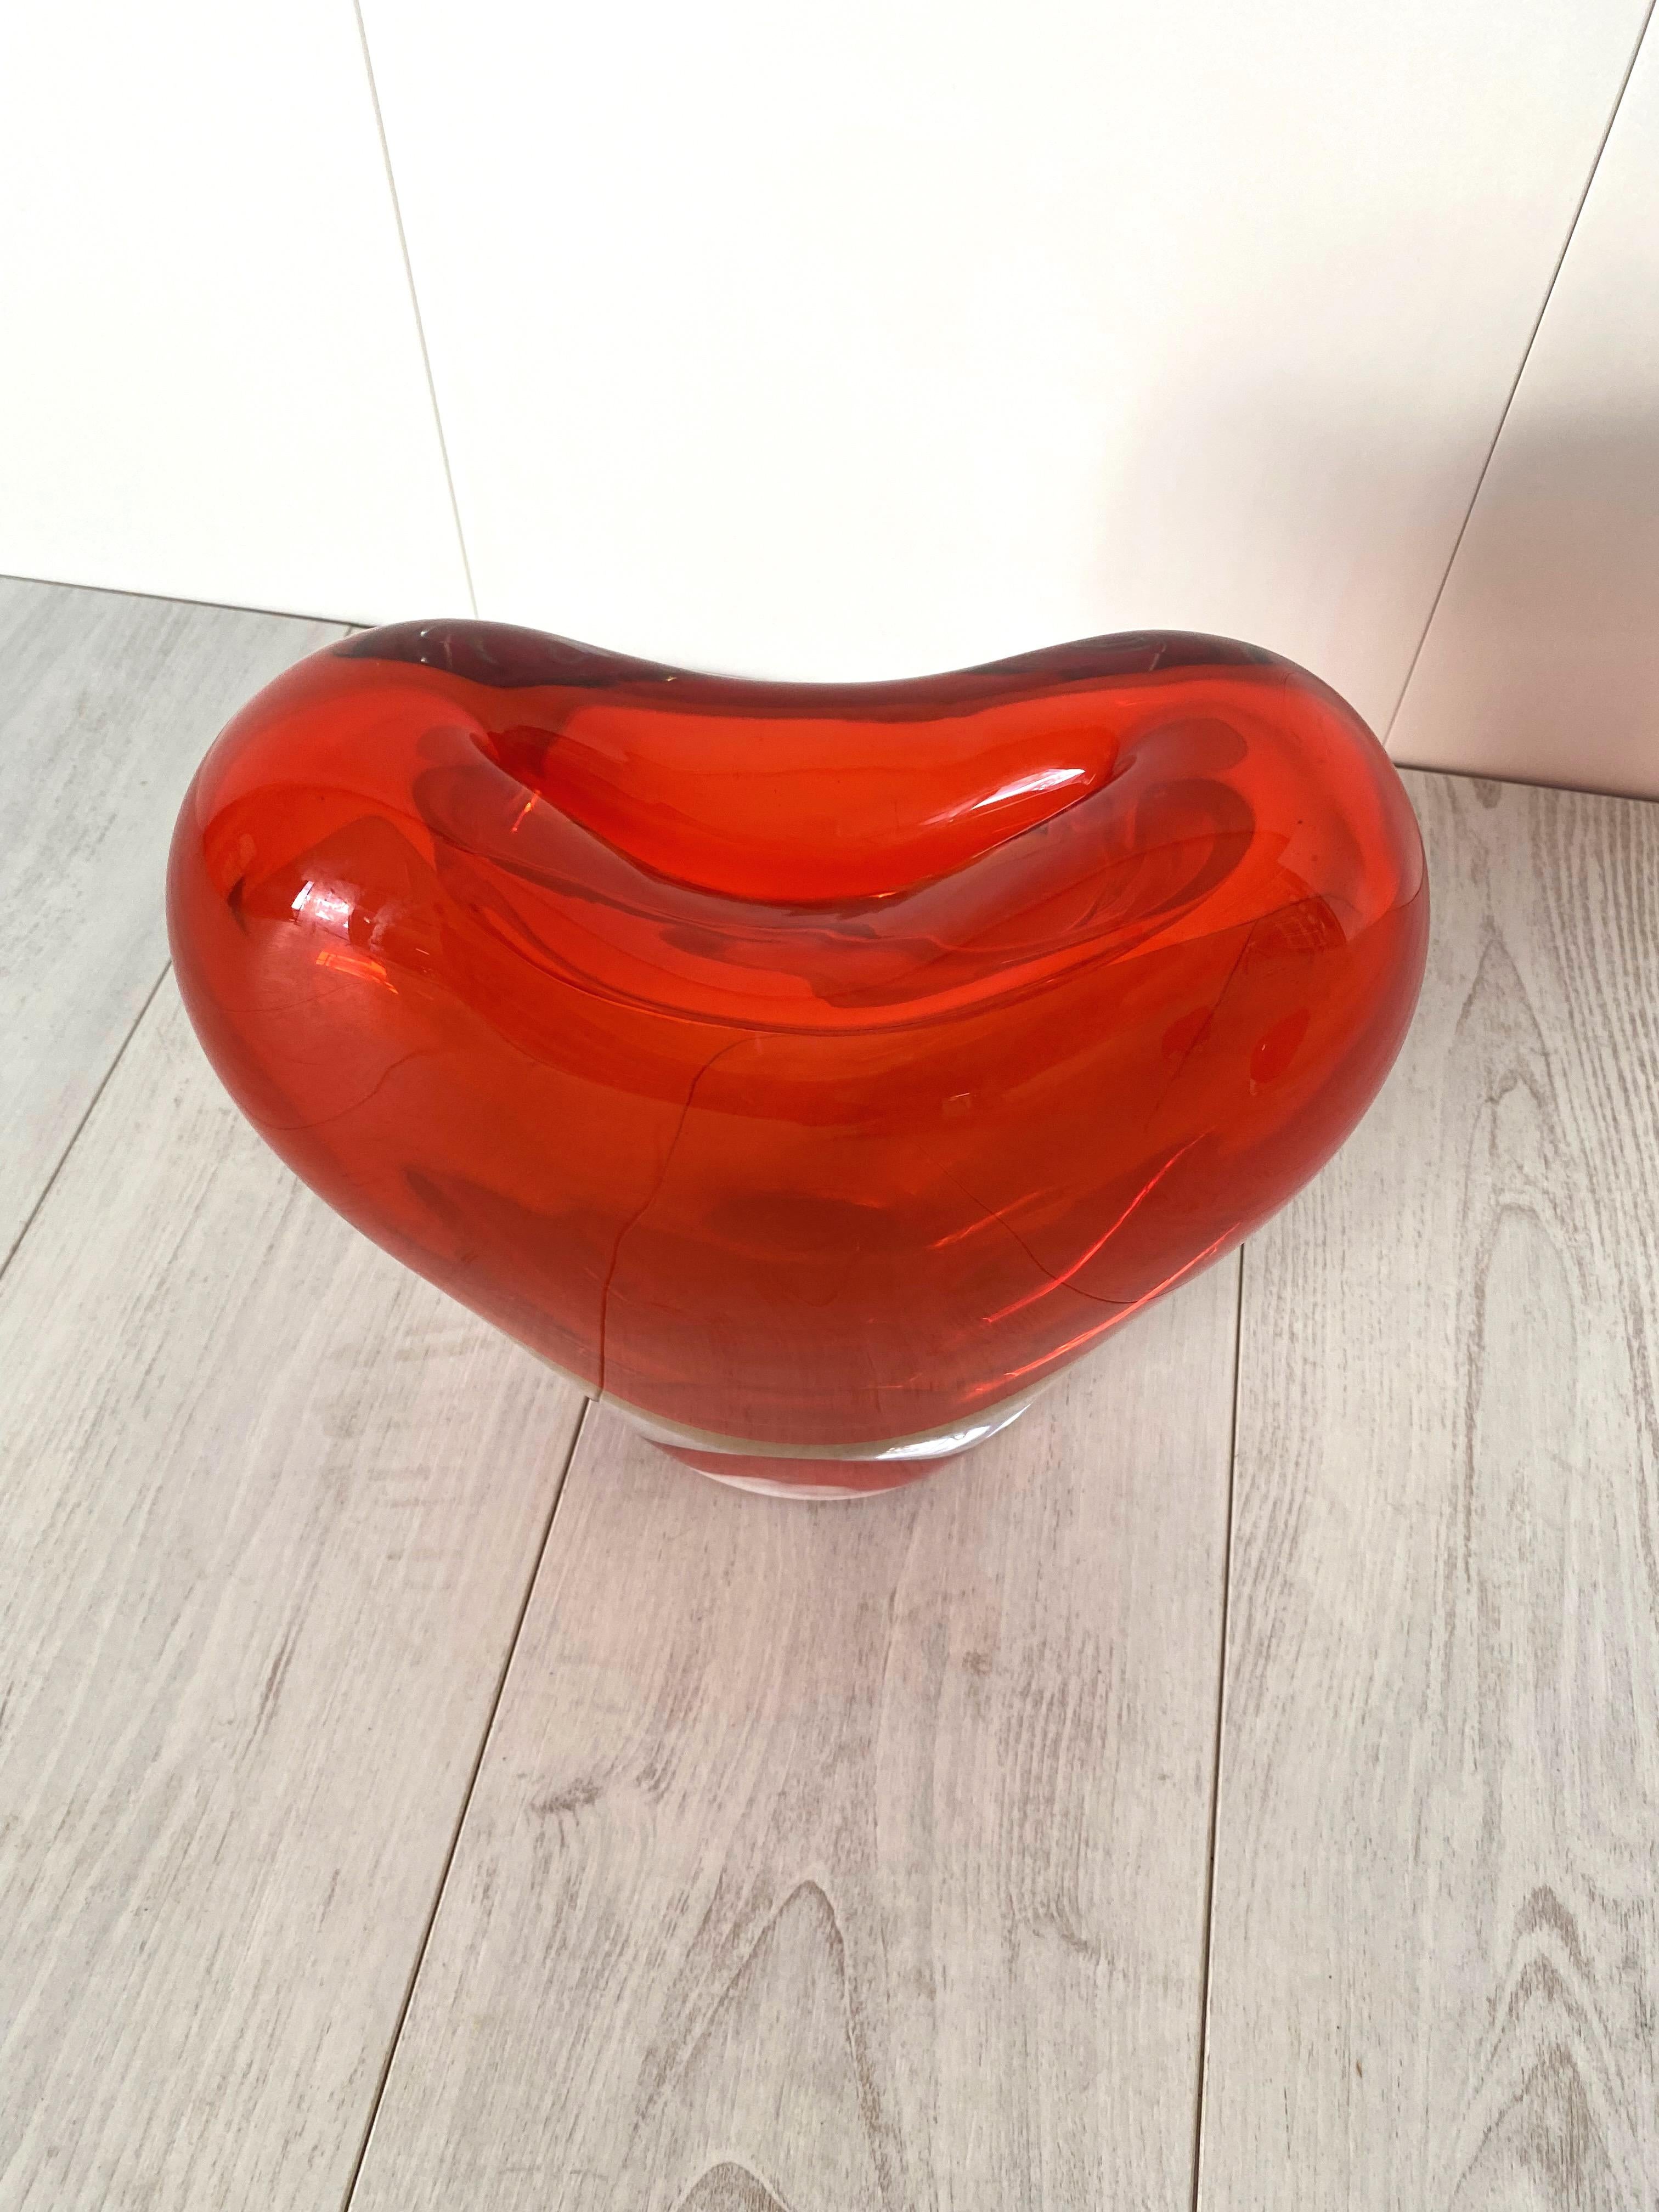 Modern Cuore & Cuoricino Heart Vases by Maria Christina Hamel for Salviati, 1990s For Sale